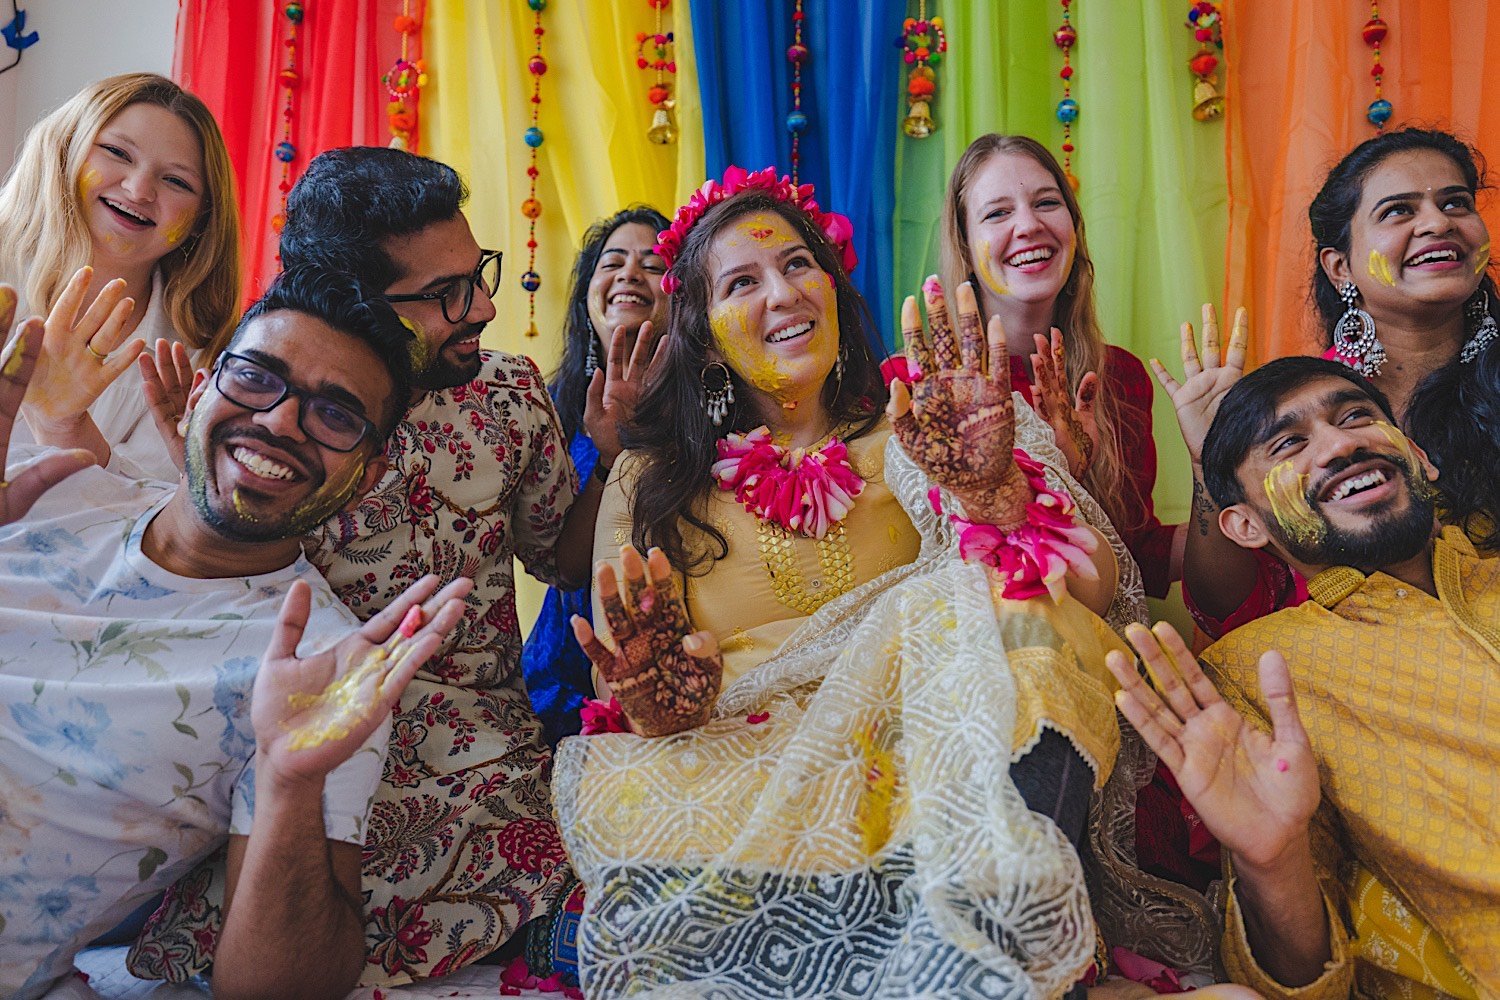 Bride to be and wedding party all smile at the camera after traditional Haldi celebration